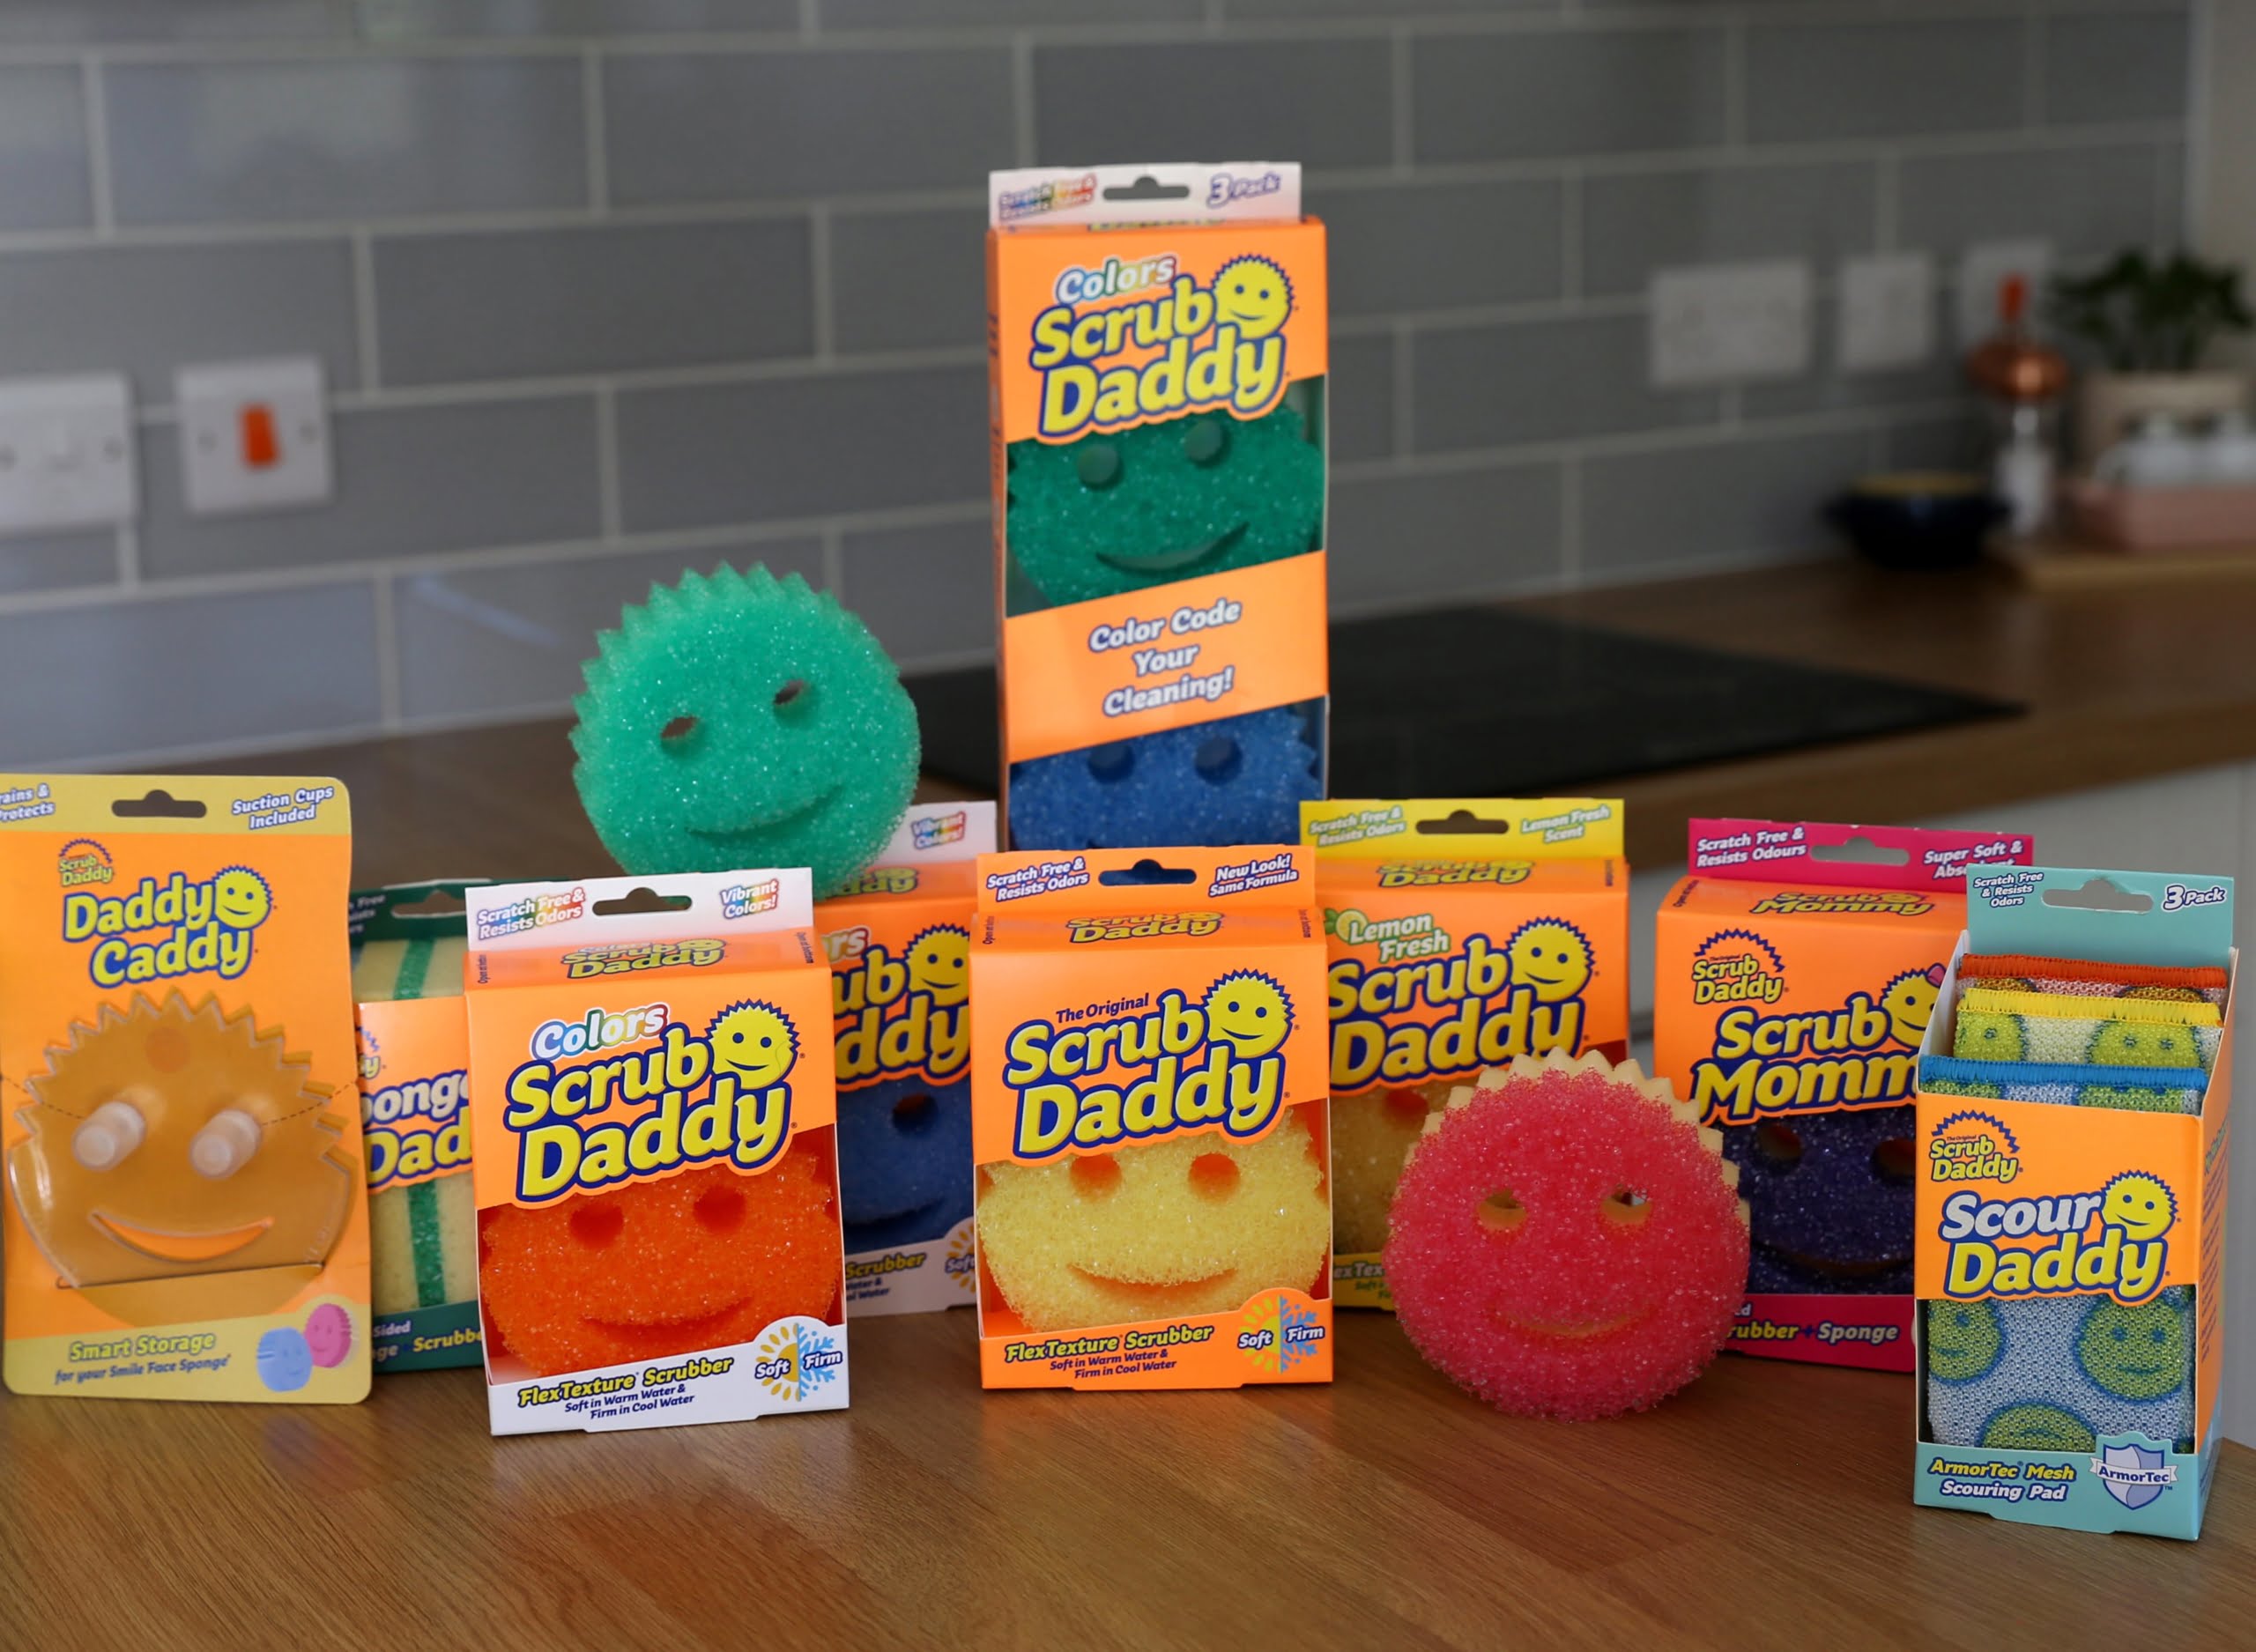 https://scrub-daddy.de/wp-content/uploads/2021/03/Retail-Products-min-scaled.jpg